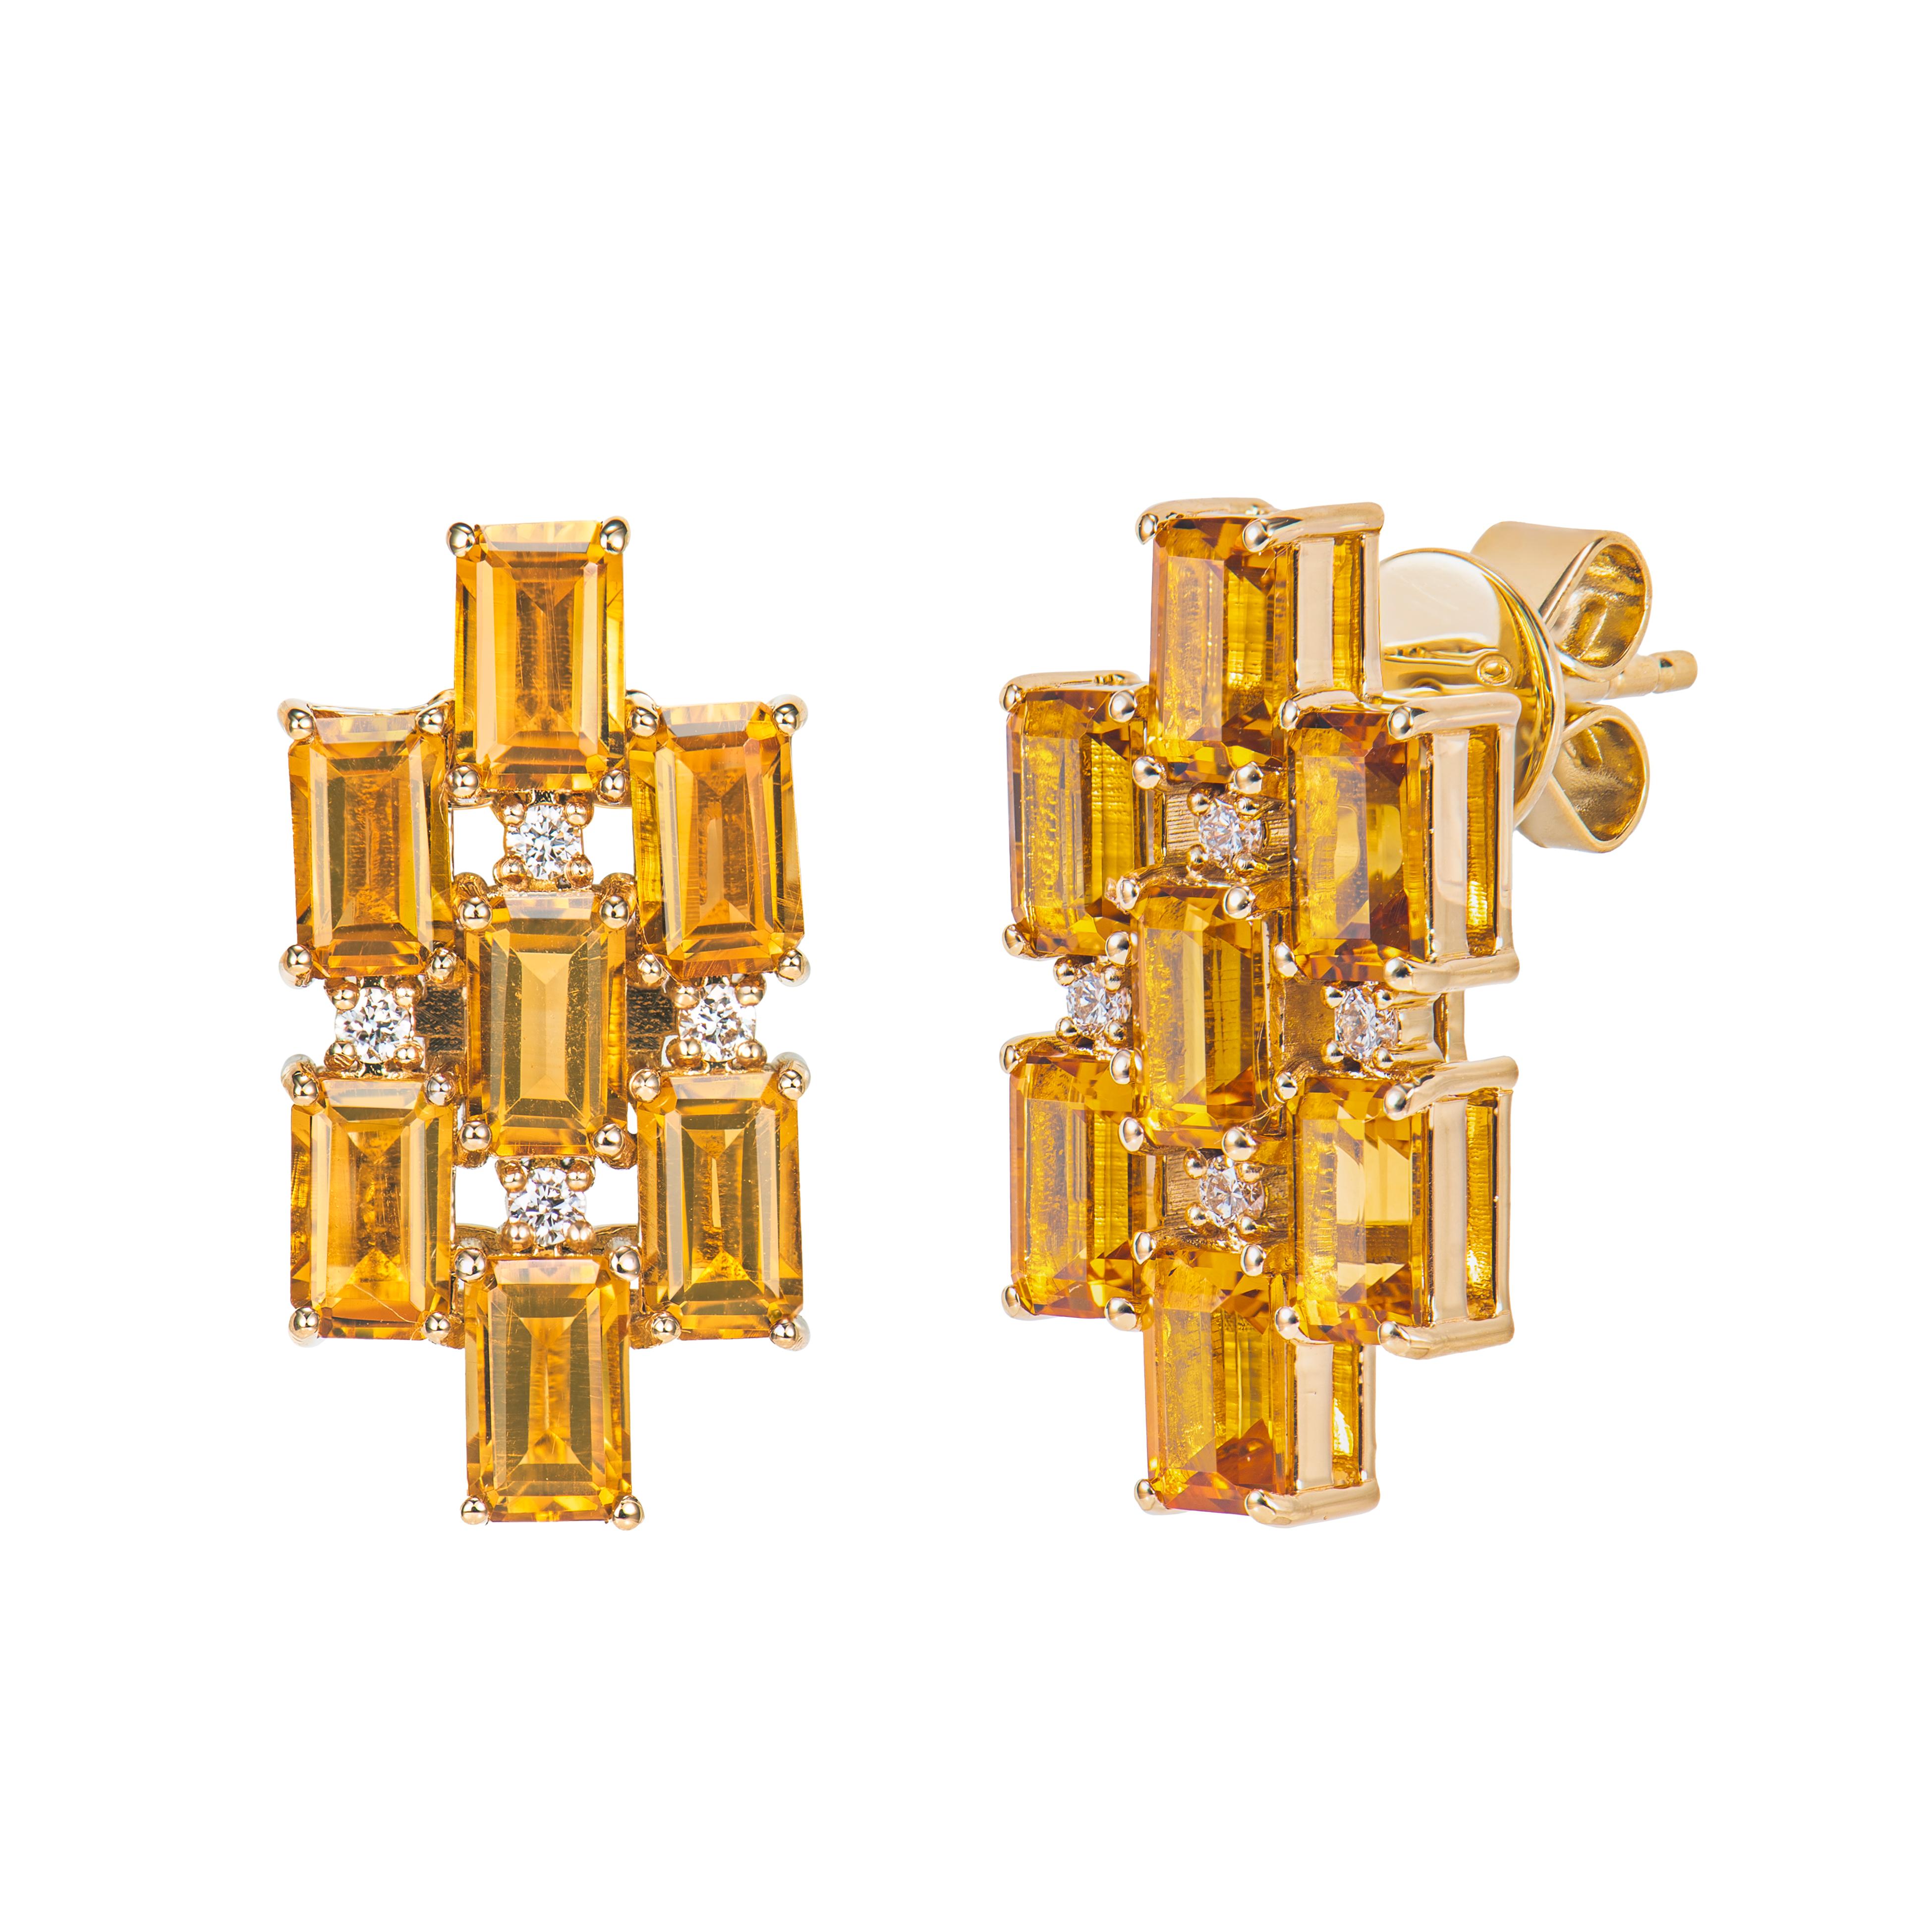 Octagon Cut 4.042 Carat Citrine Drop Earring in 18Karat Yellow Gold with White Diamond. For Sale